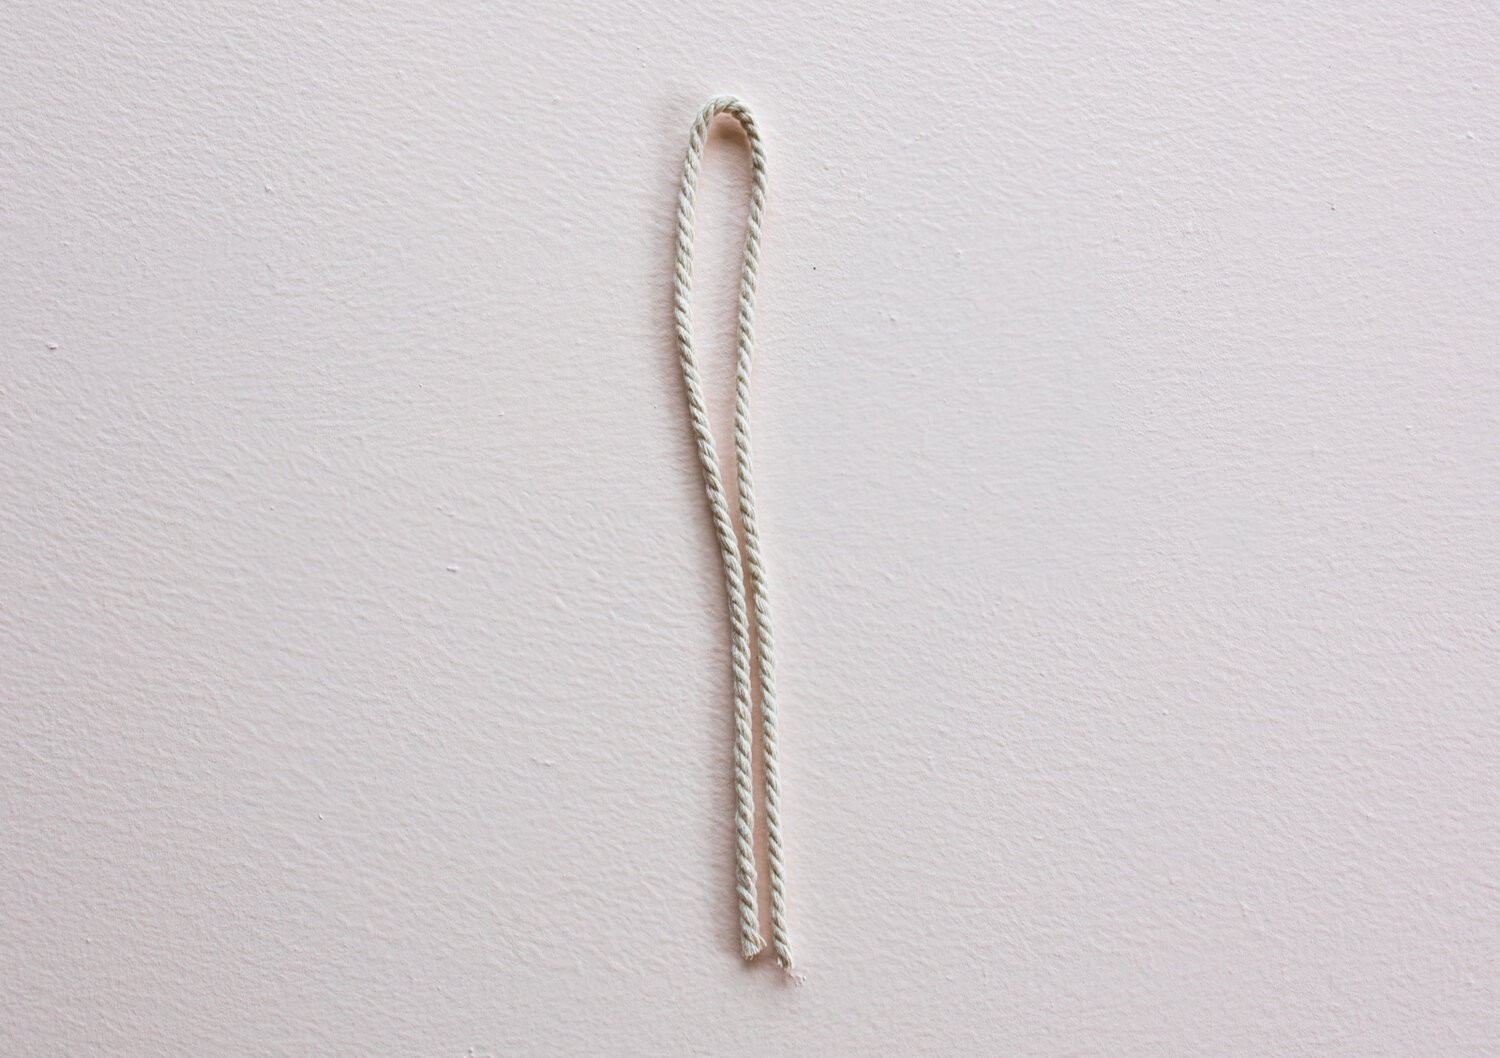 A doubled-over piece of string lies on the table.